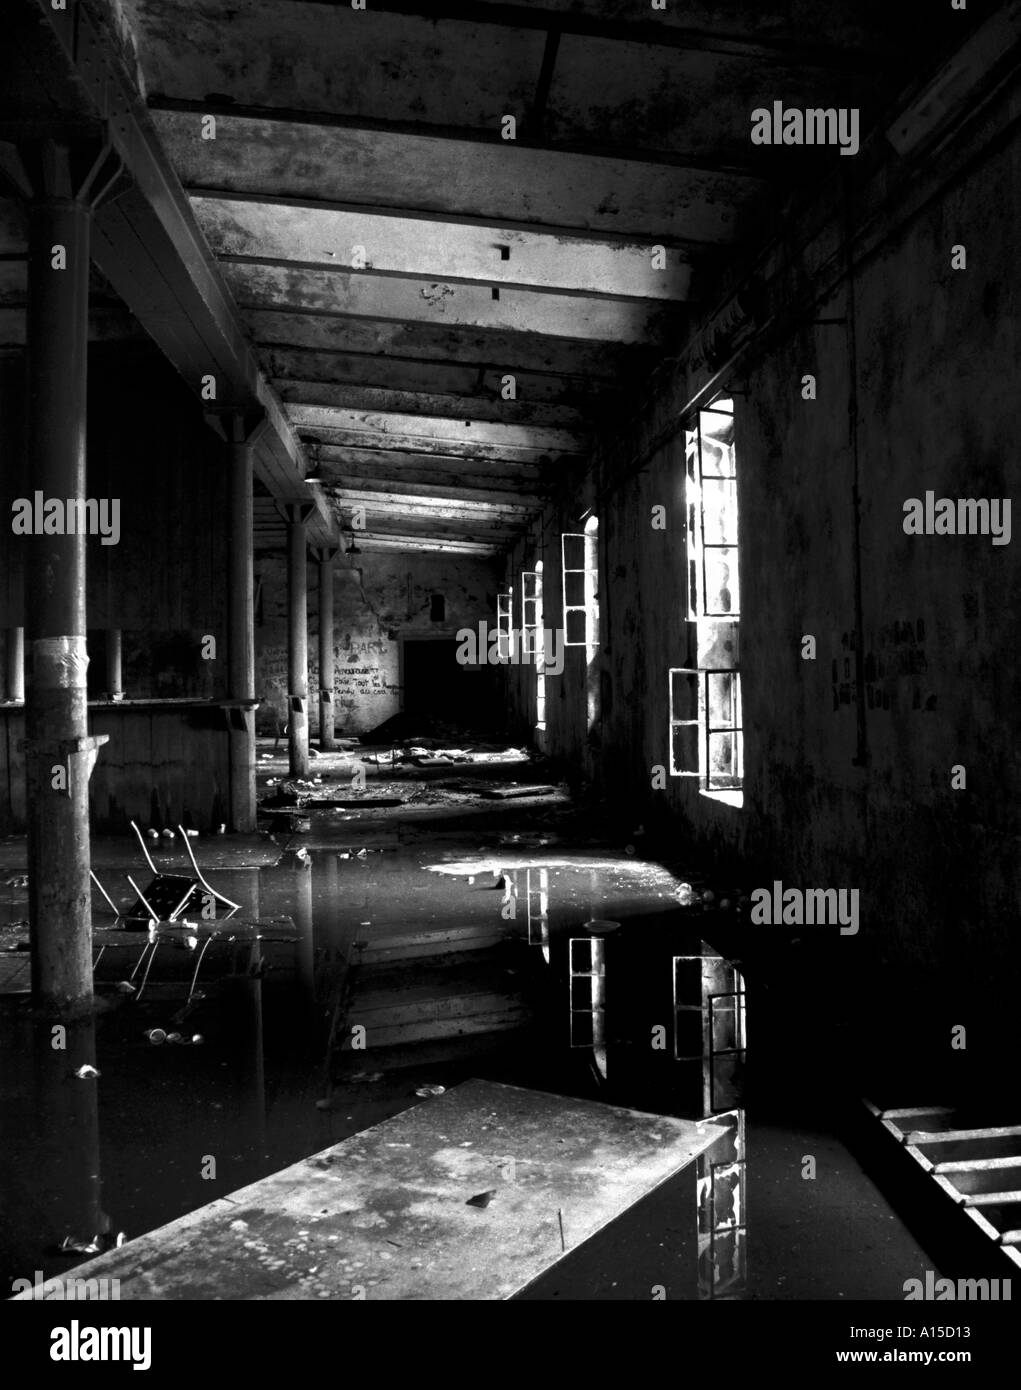 Interior of abandoned, dilapidated building. Stock Photo